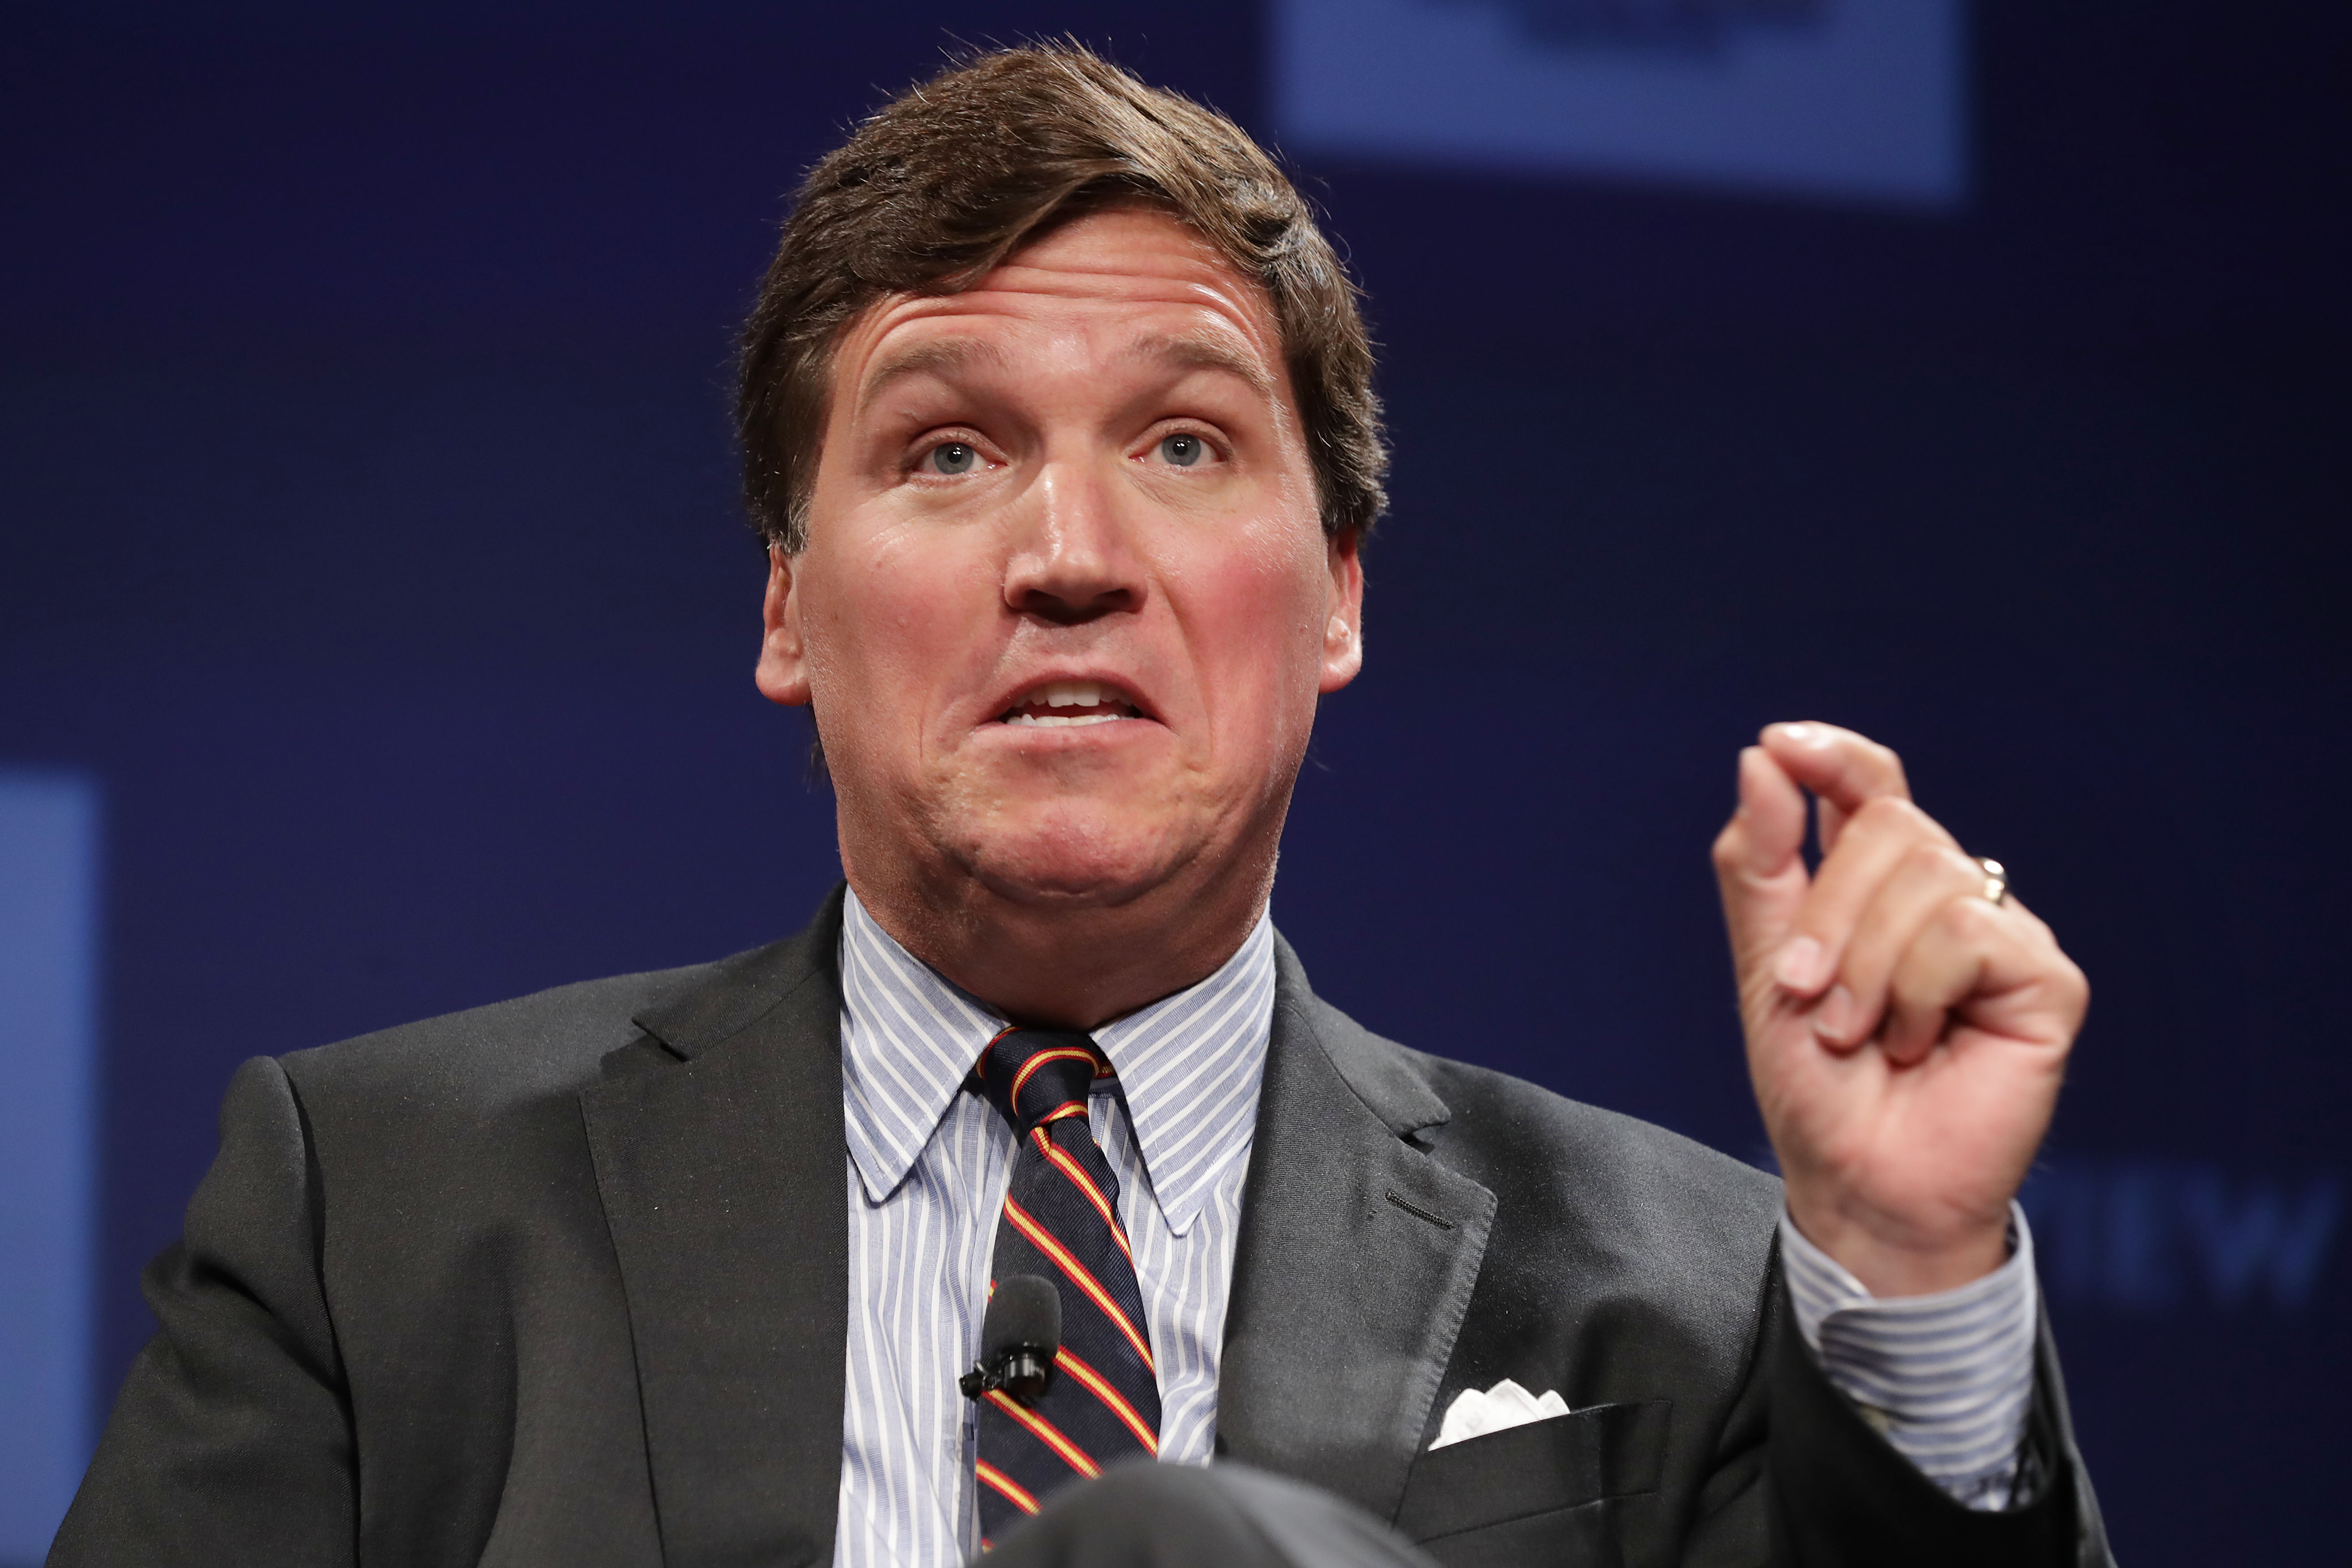 Tucker Carlson speaks, gesturing with one hand, to an unseen audience. He’s wearing a dark gray suit, a white-and-gray-striped shirt, and a navy striped tie, and sits in front of a dark blue background.